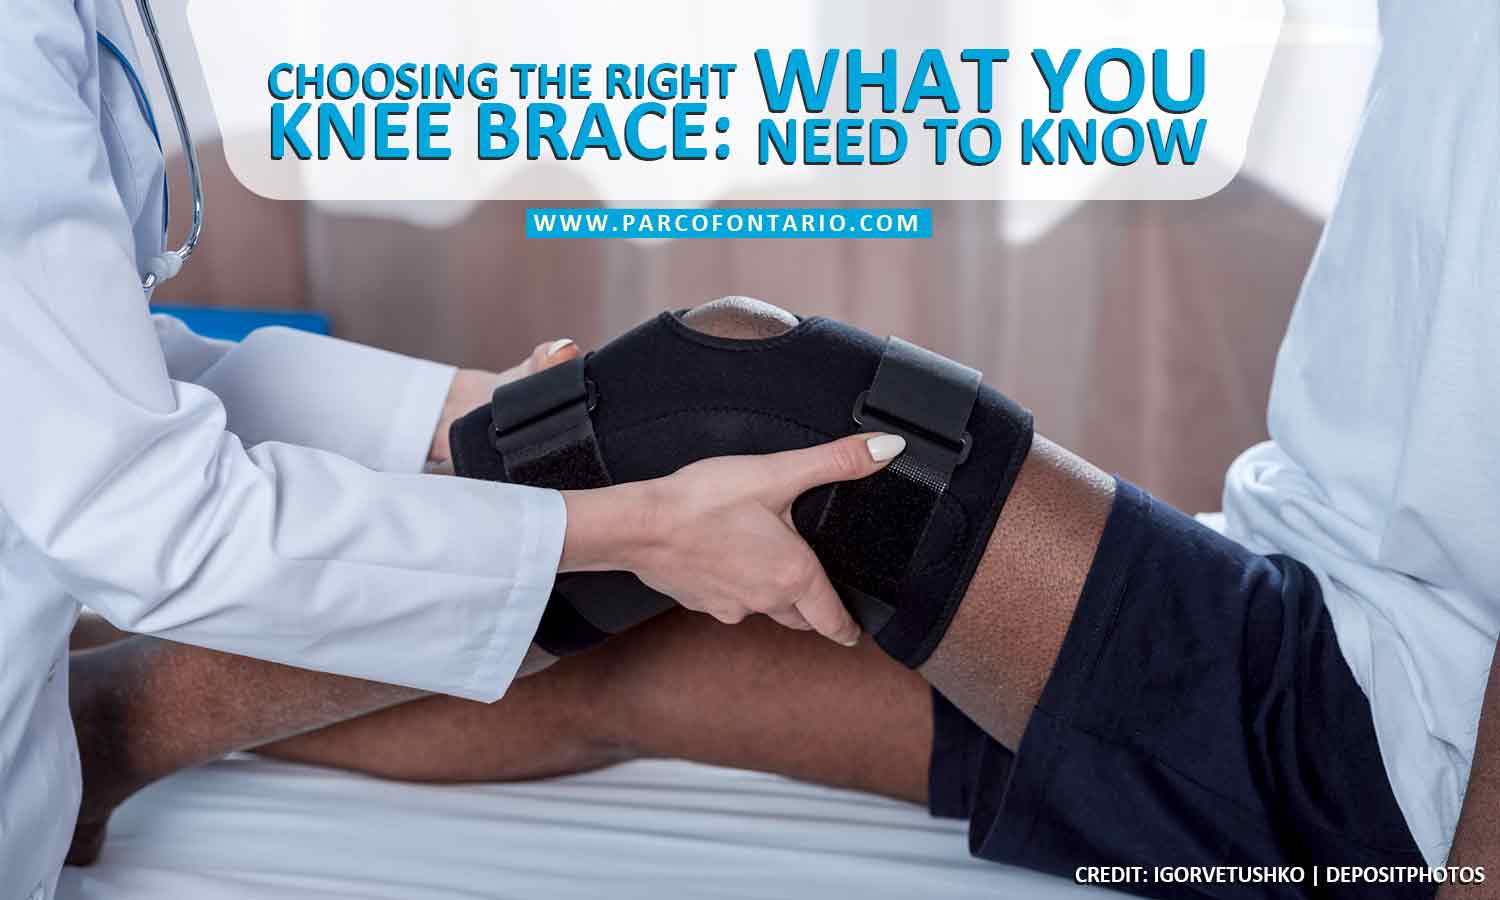 Choosing the Right Knee Brace: What You Need to Know